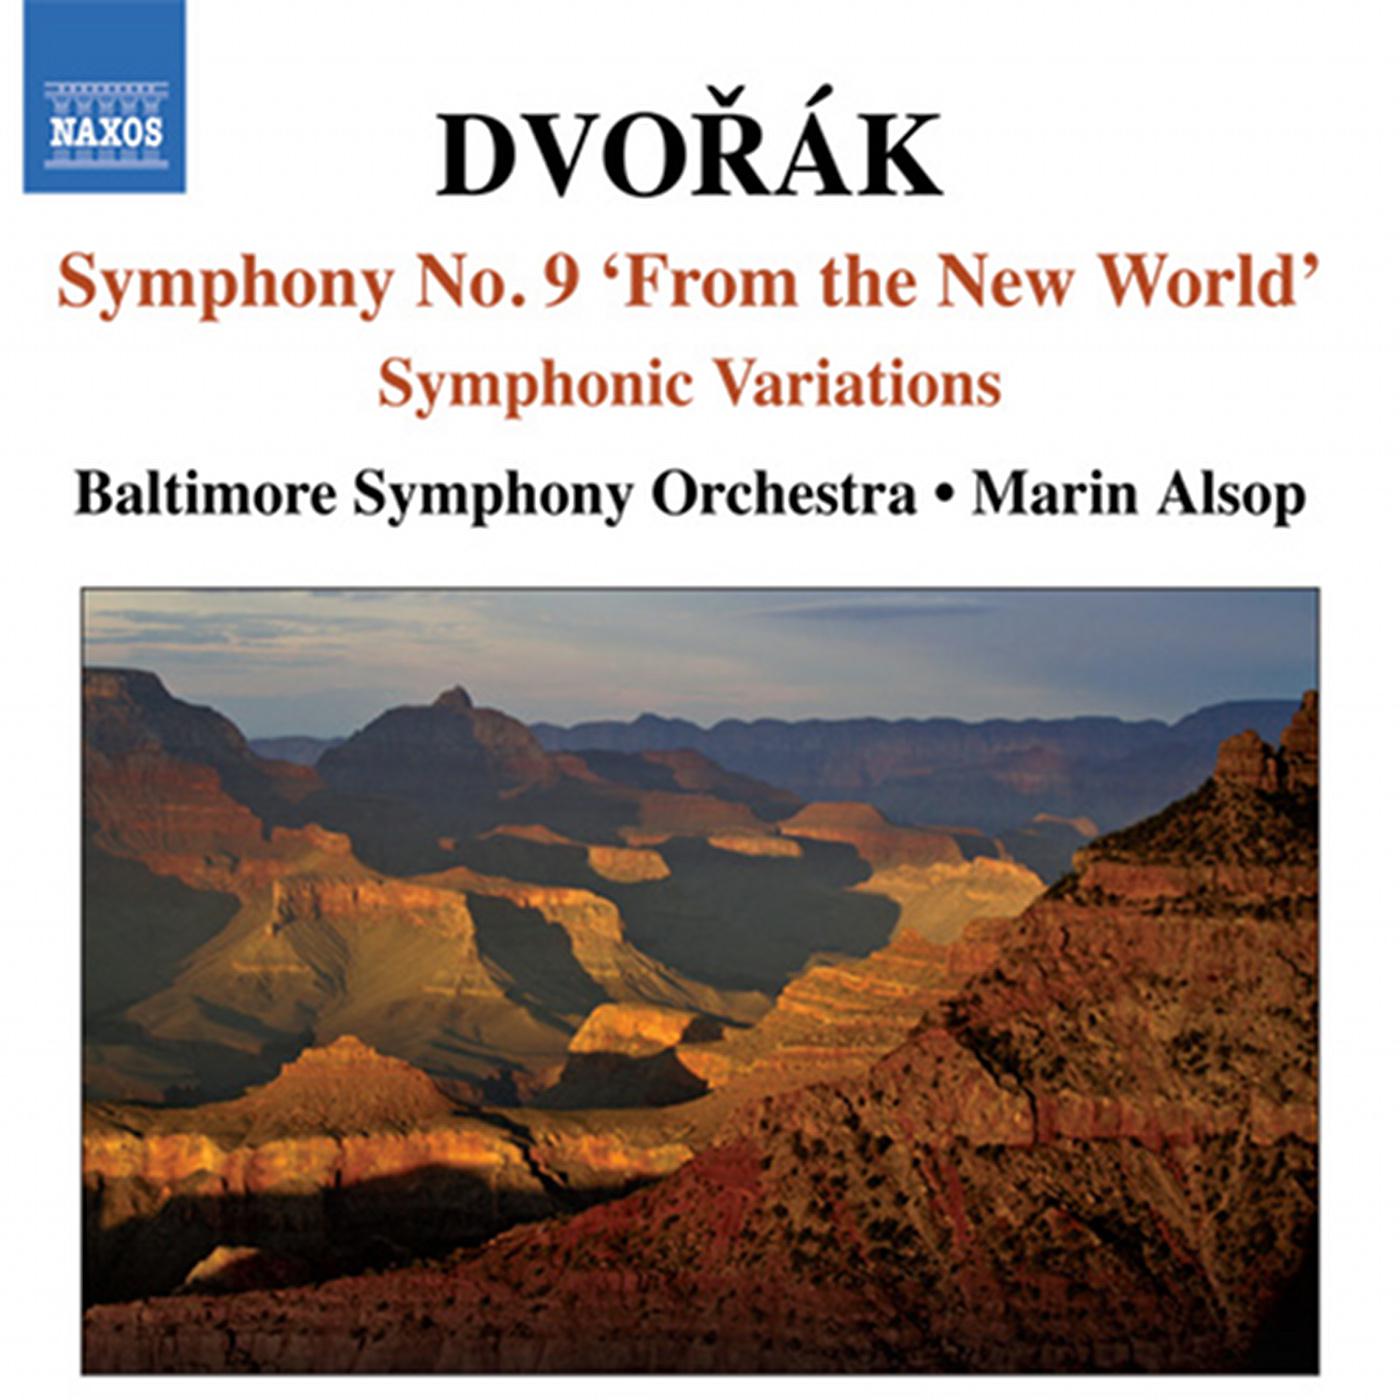 Symphony No. 9 in E Minor, Op. 95, B. 178, "From the New World": IV. Allegro con fuoco Symphony No. 9 in E Minor, Op. 95, B. 178, "From the New World"